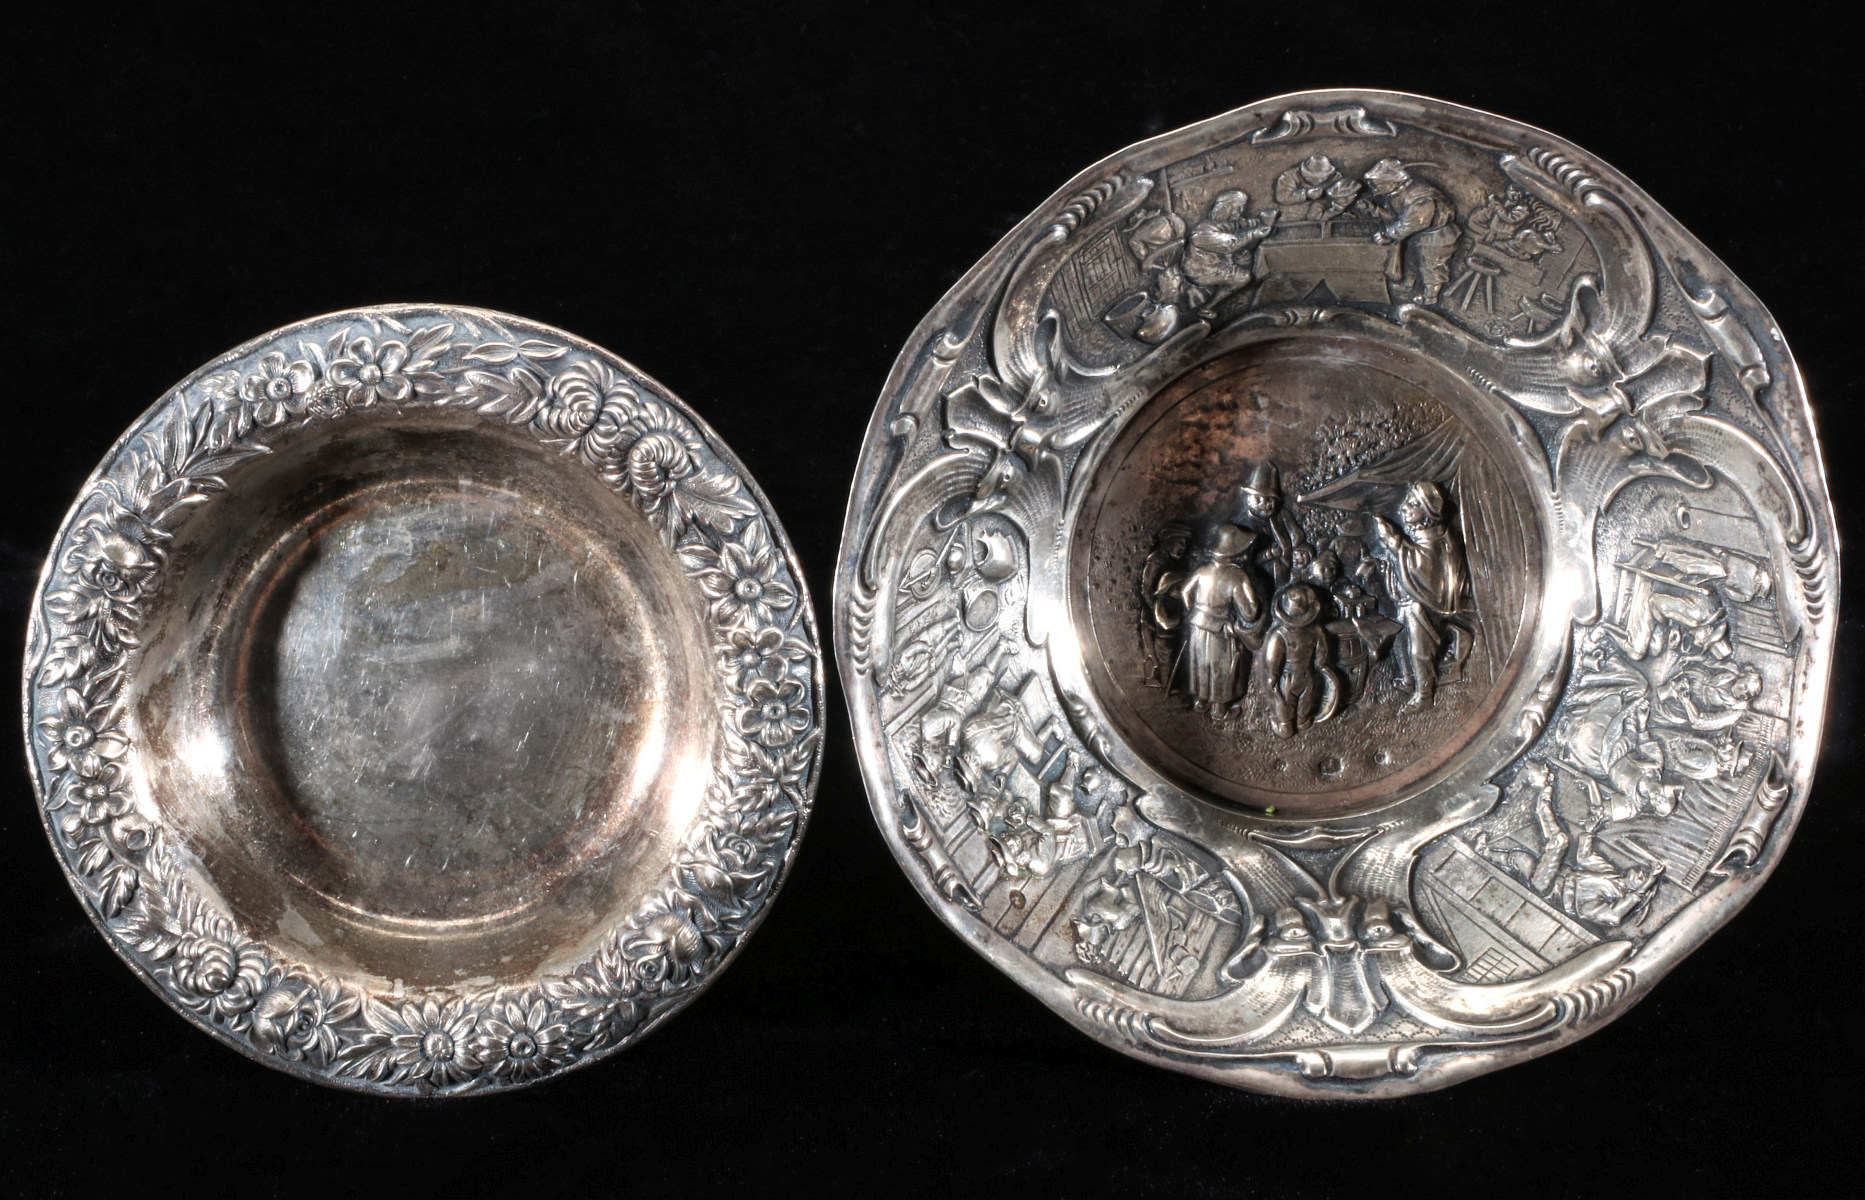 R. KIRK AND CONTINENTAL SILVER ORNATE REPOUSSE BOWLS